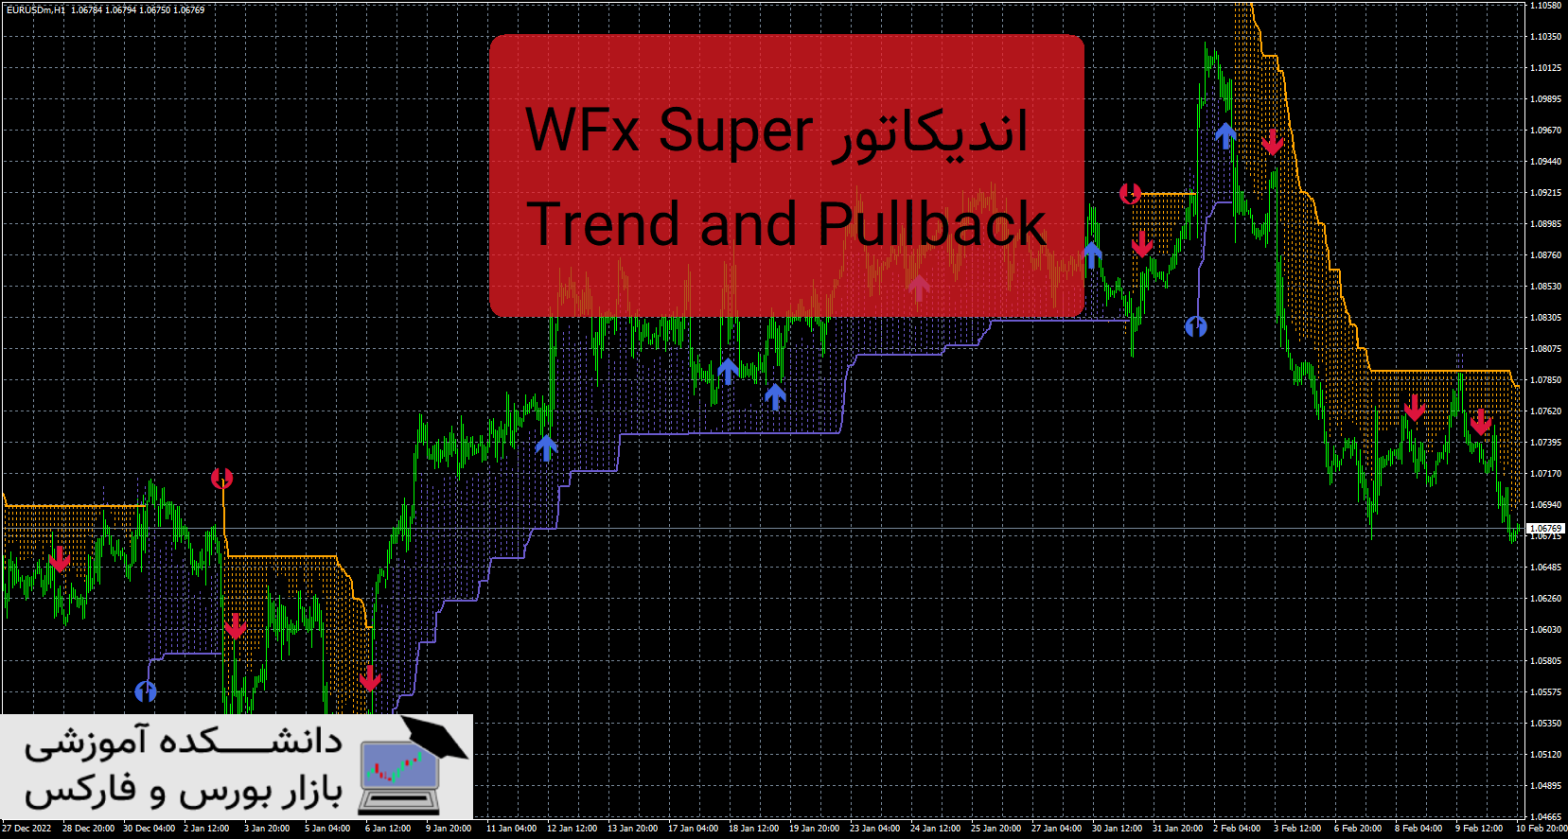 WFx Super Trend and Pullback دانلود اندیکاتور